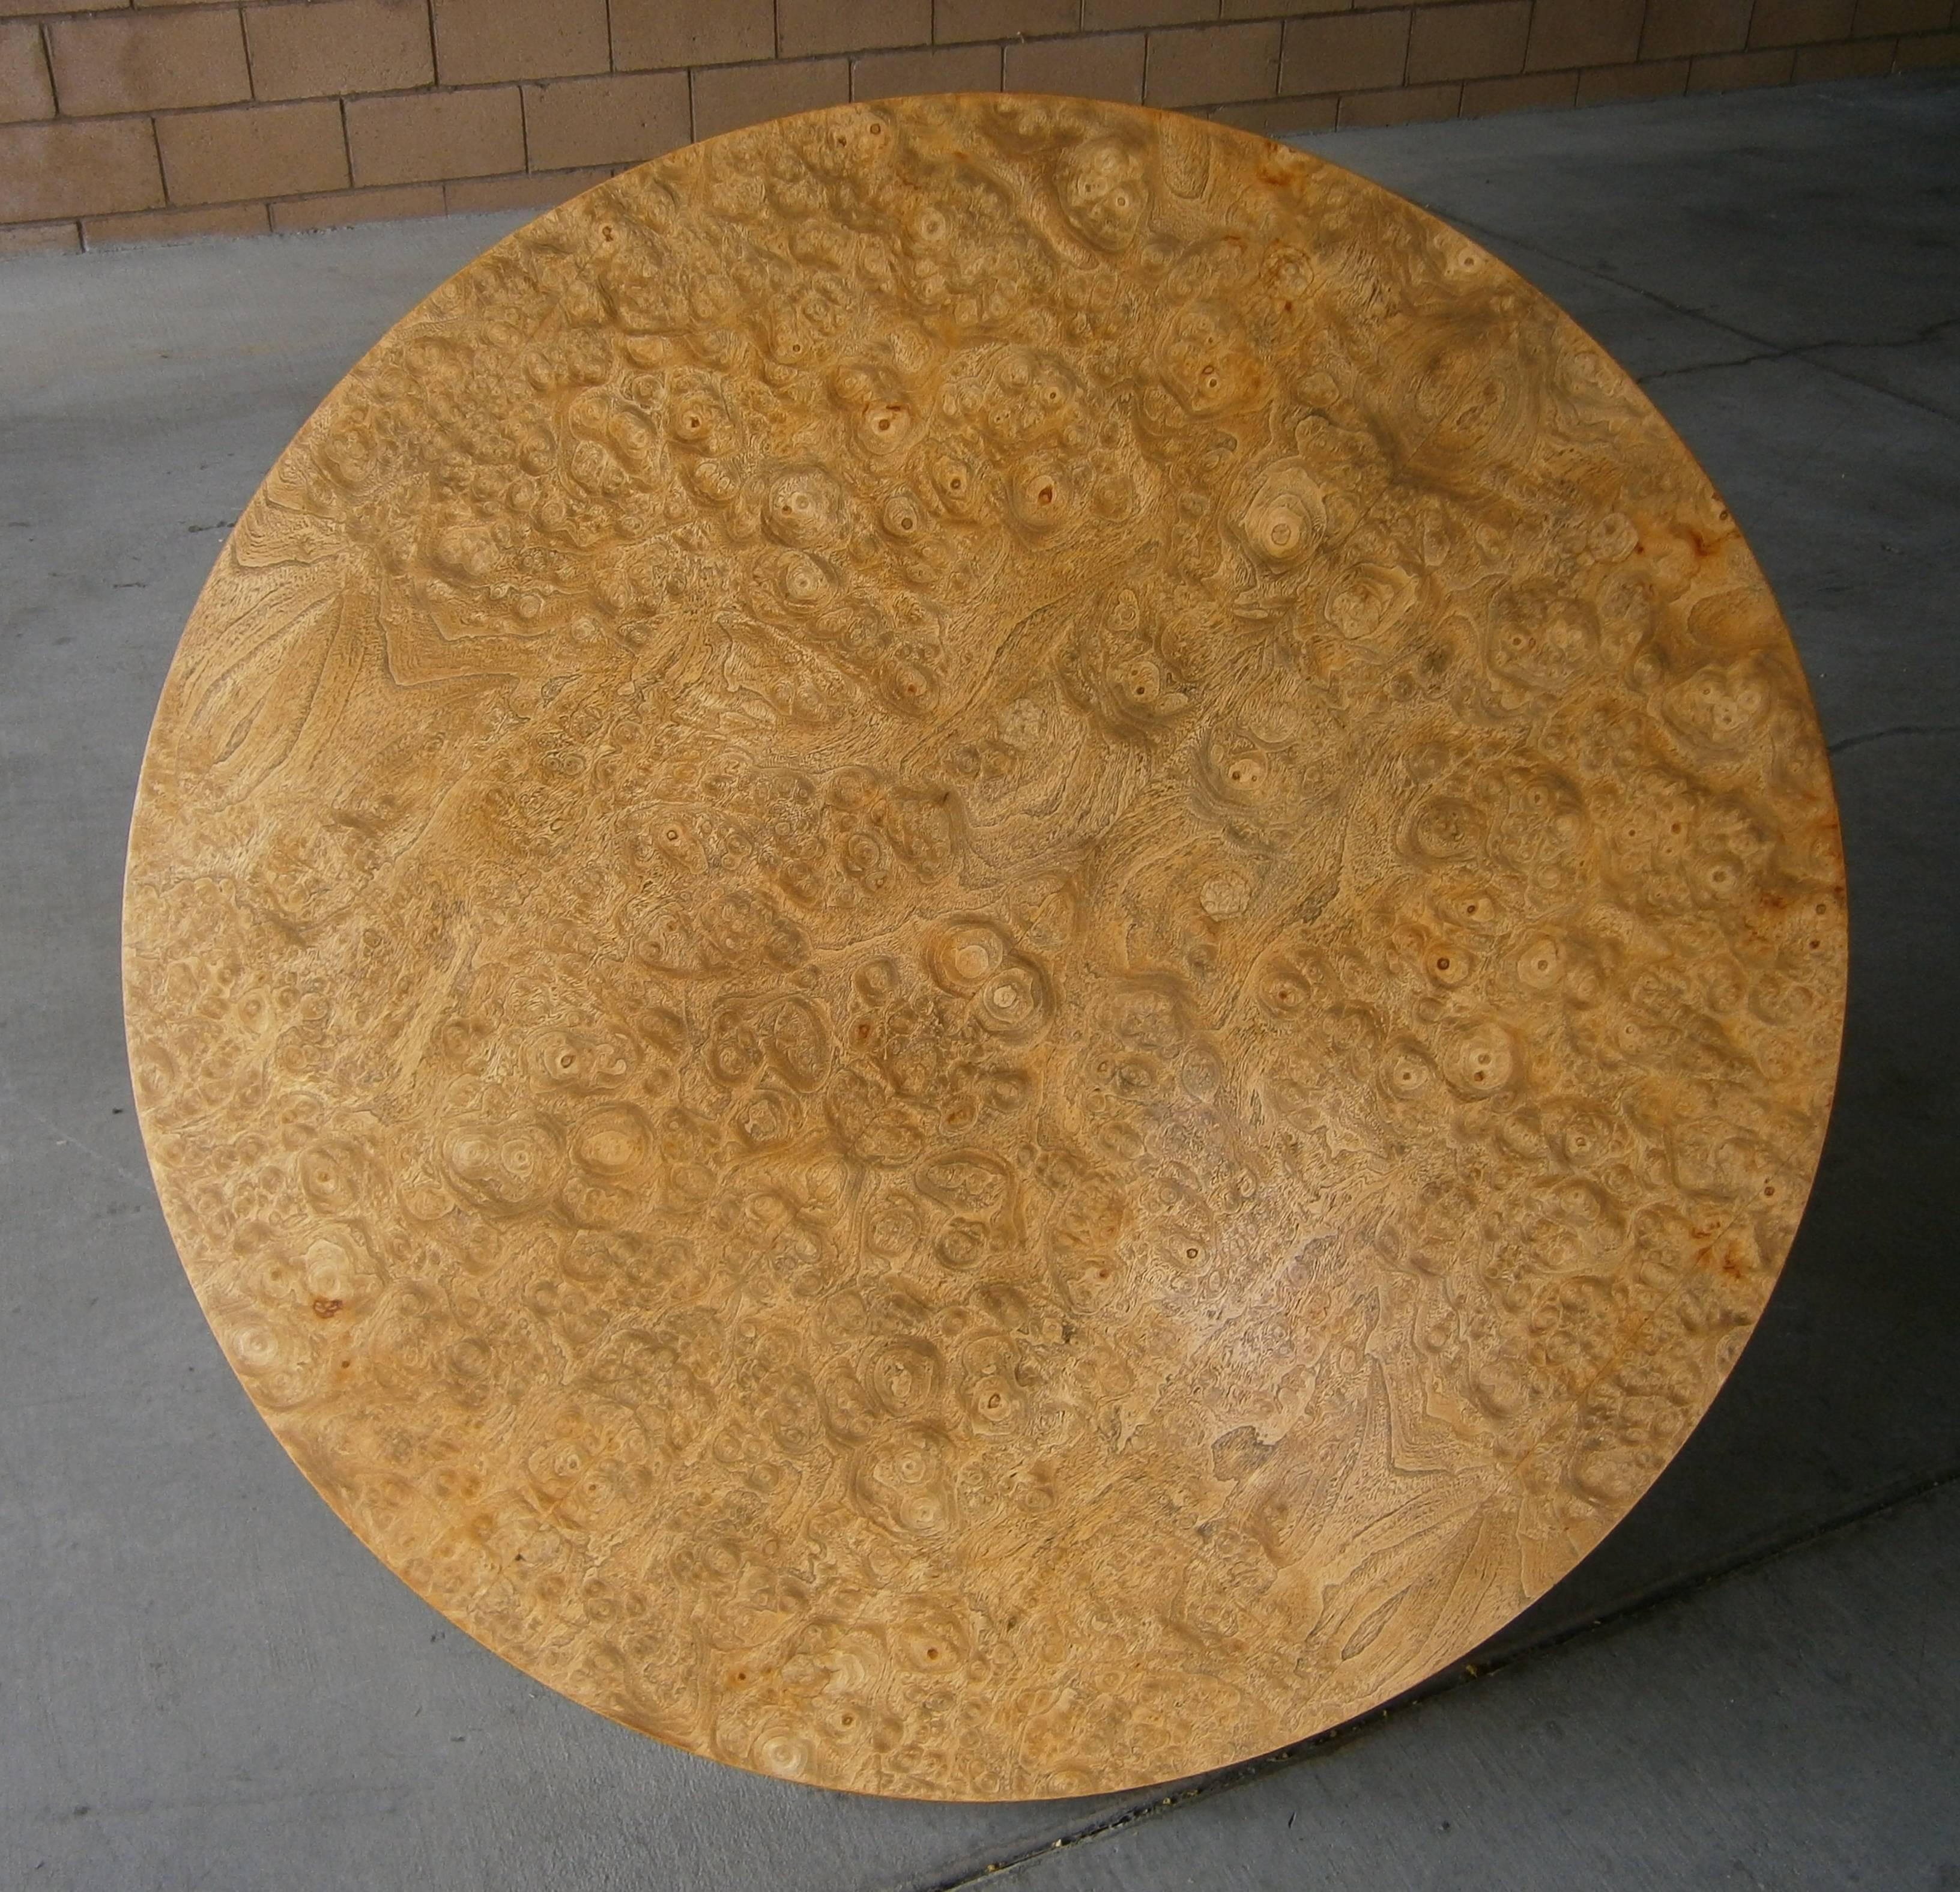 A circular dining or center table designed by John Vesey in 1958. The barrel-form base of the table is fabricated from slightly bent bands of aluminum and brass and the addition of the burled wood top is original to the table. The table was acquired